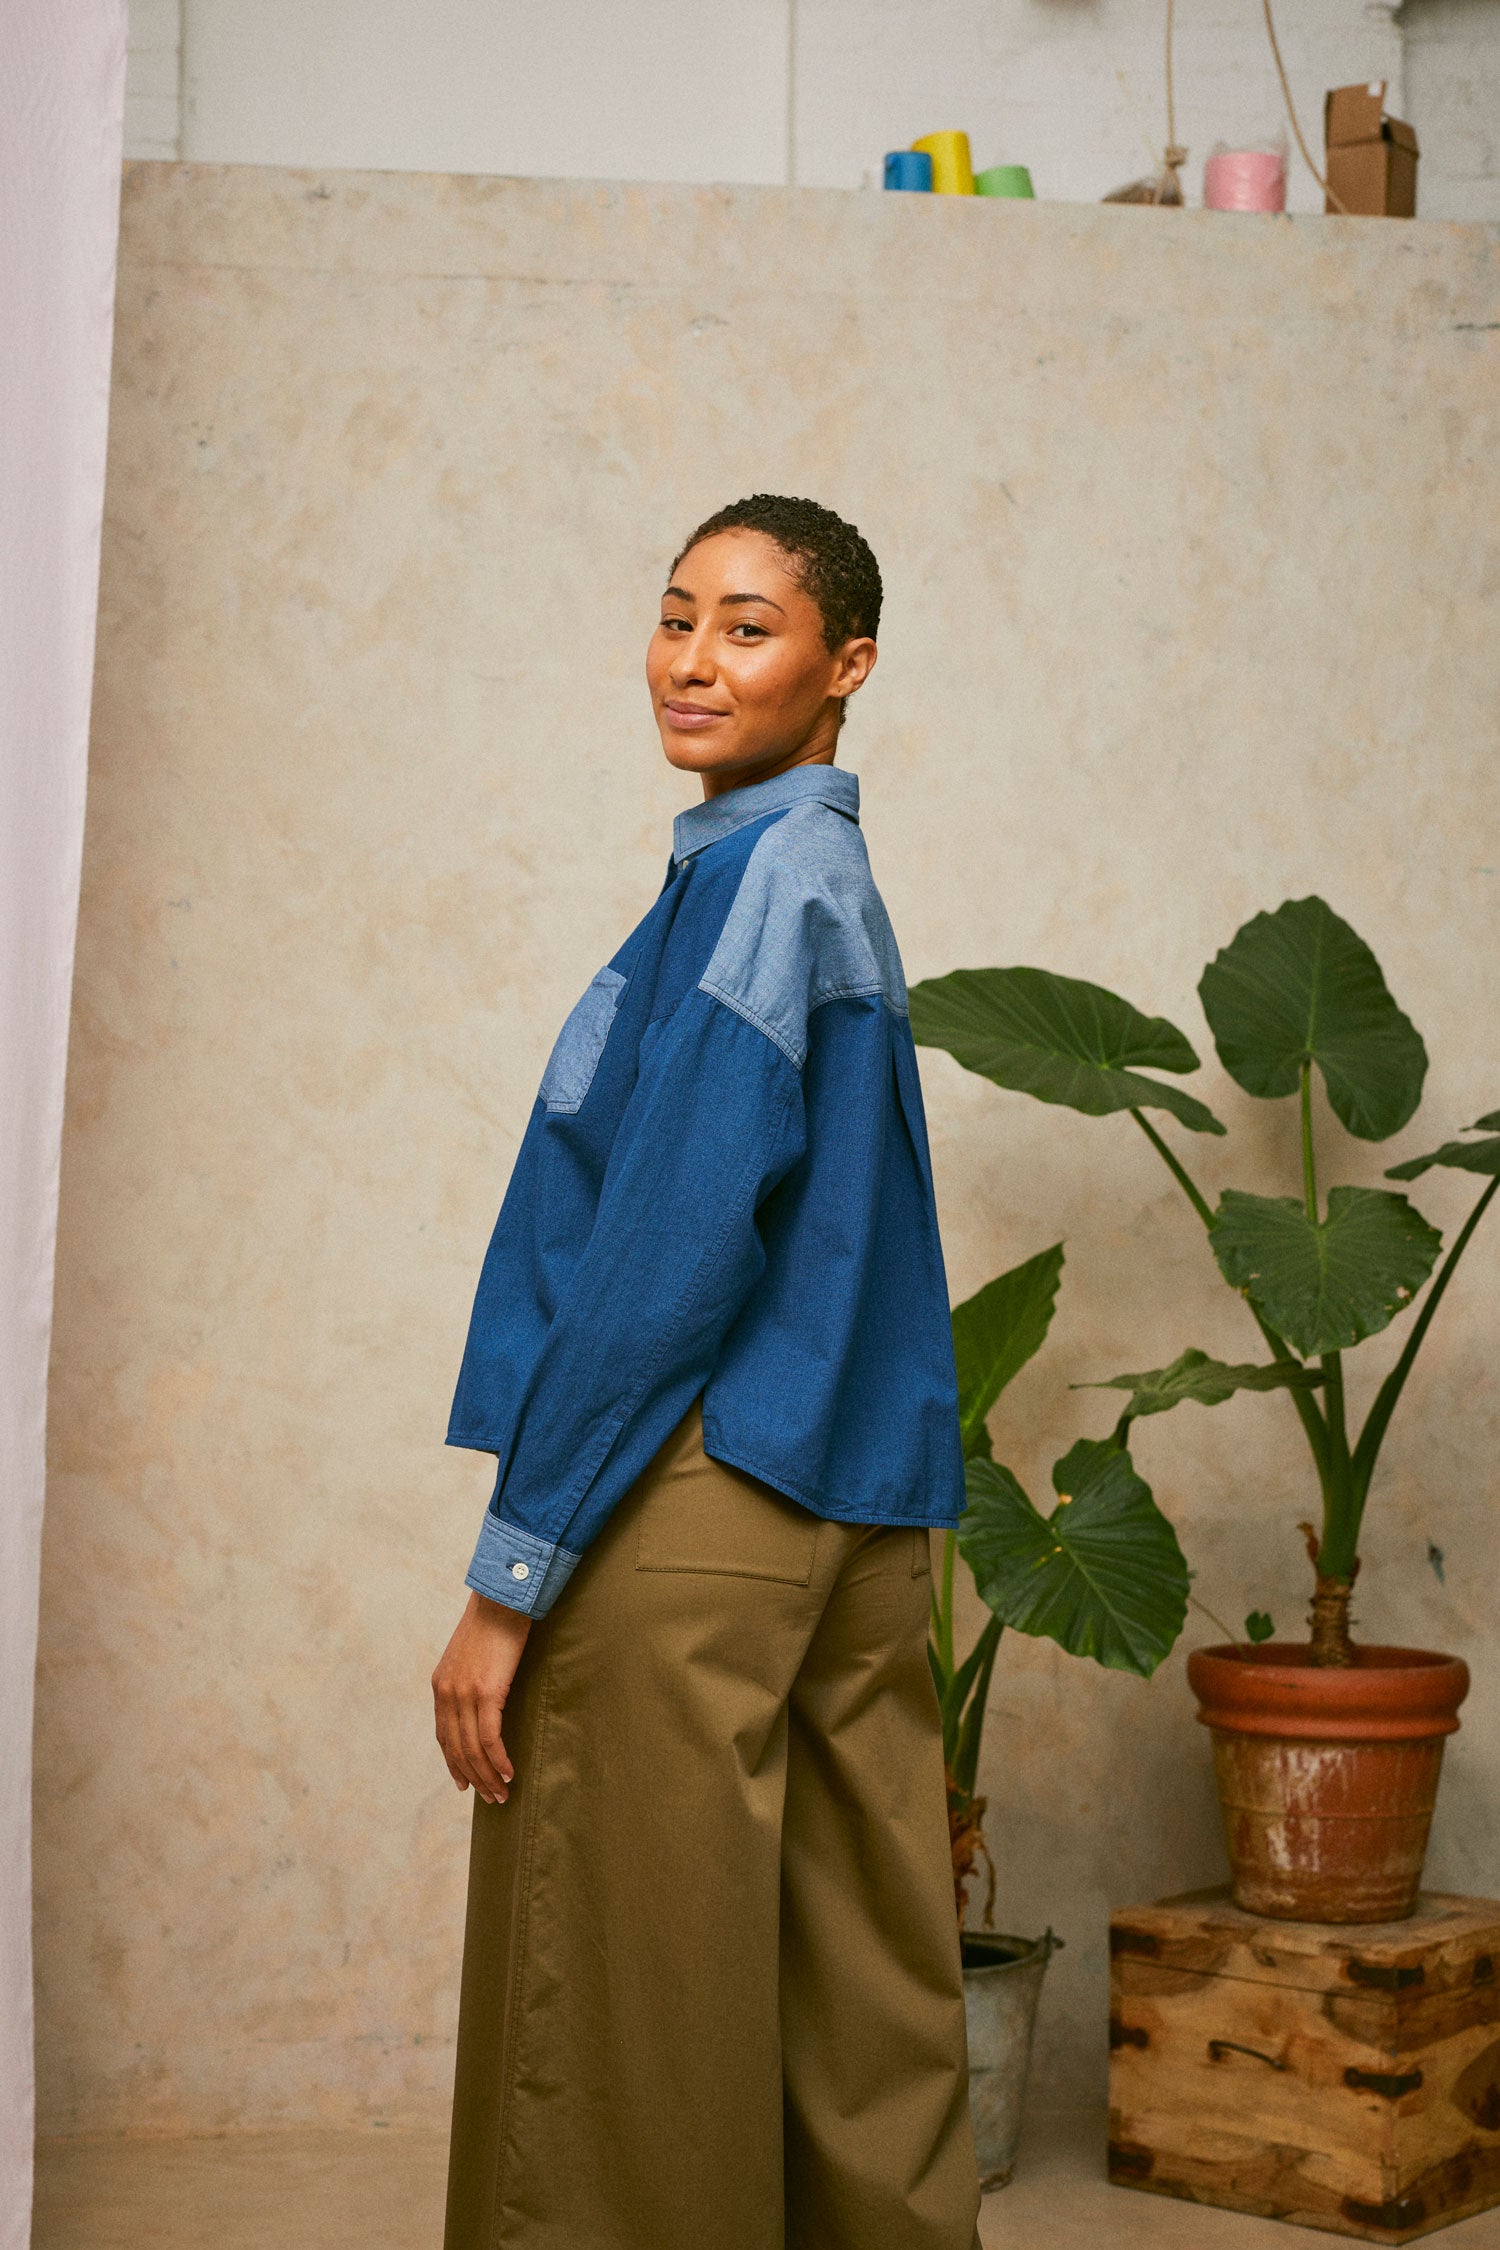 Model stands in front of a pink drop of fabric and two plants in the background. She wears Saywood's Japanese Denim Lela Patchwork Shirt, with light wash contrast cuffs, pockets, collar and yoke. Worn with khaki Amelia Trousers. Side view